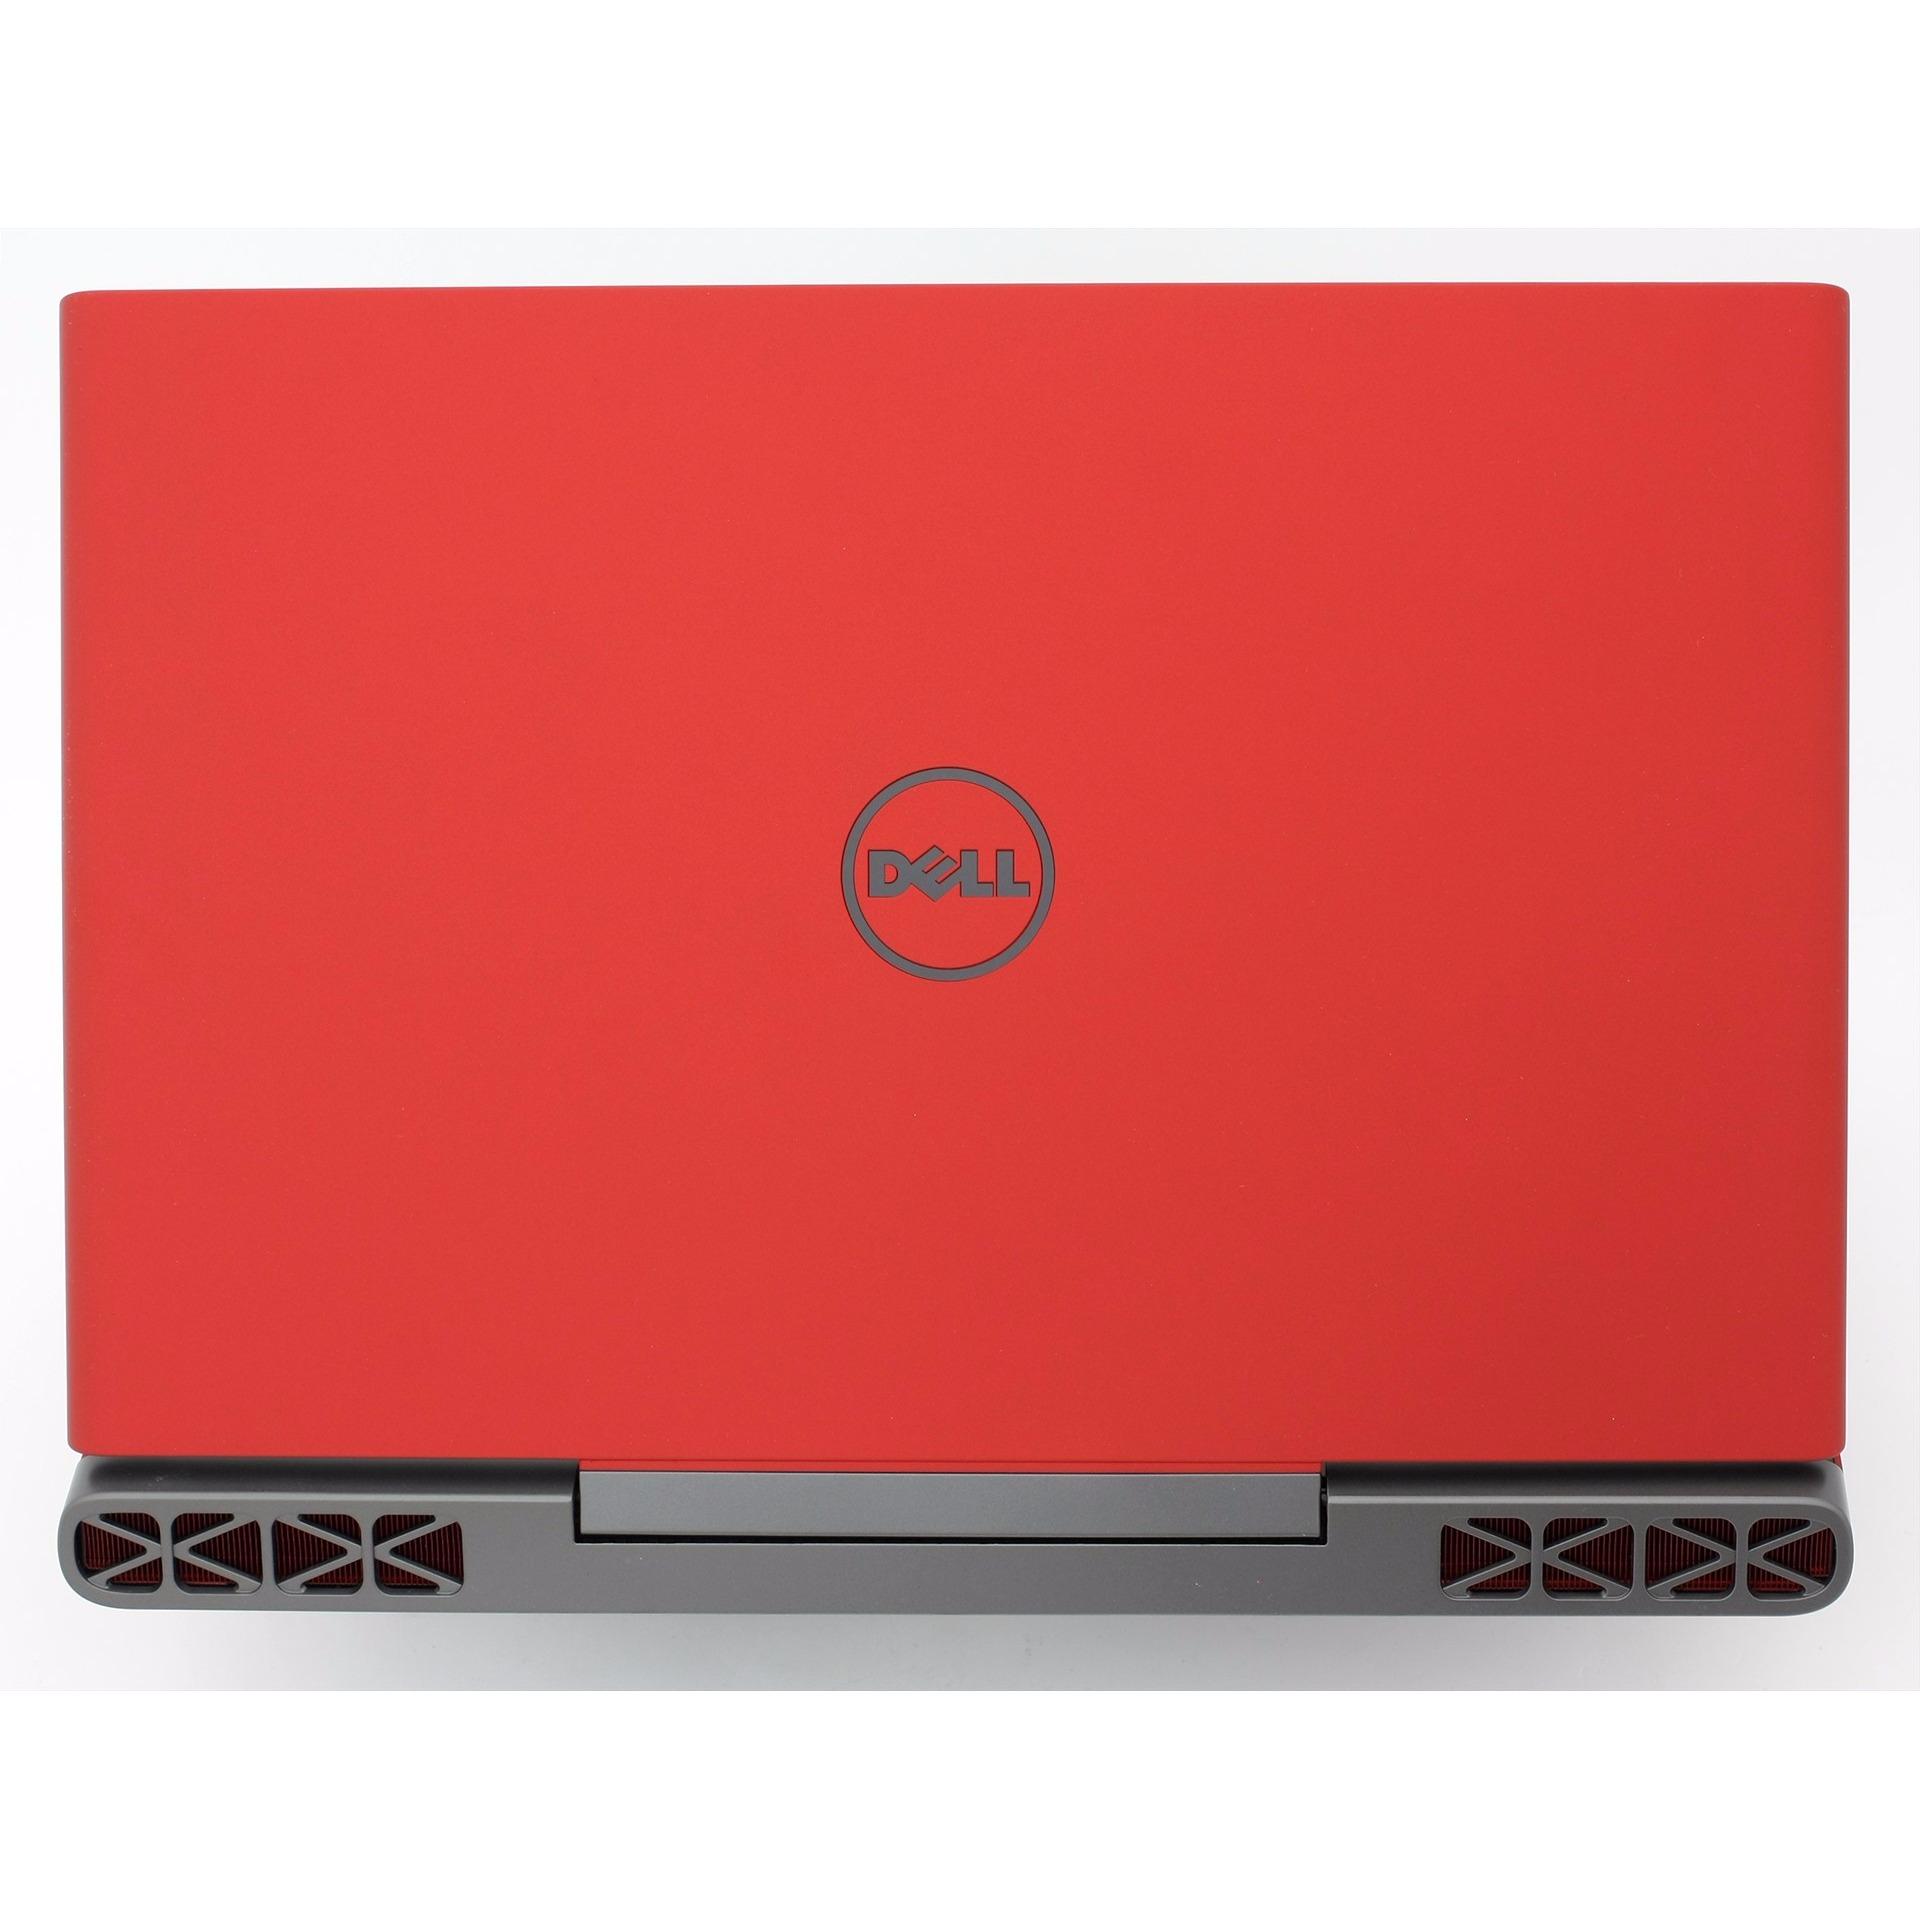 DELL 7567 Inspiron 15 7000 Gaming Laptop (RED) - i7-7700HQ,GTX1050TI 4GB,WIN10 *END OF MONTH PROMO*